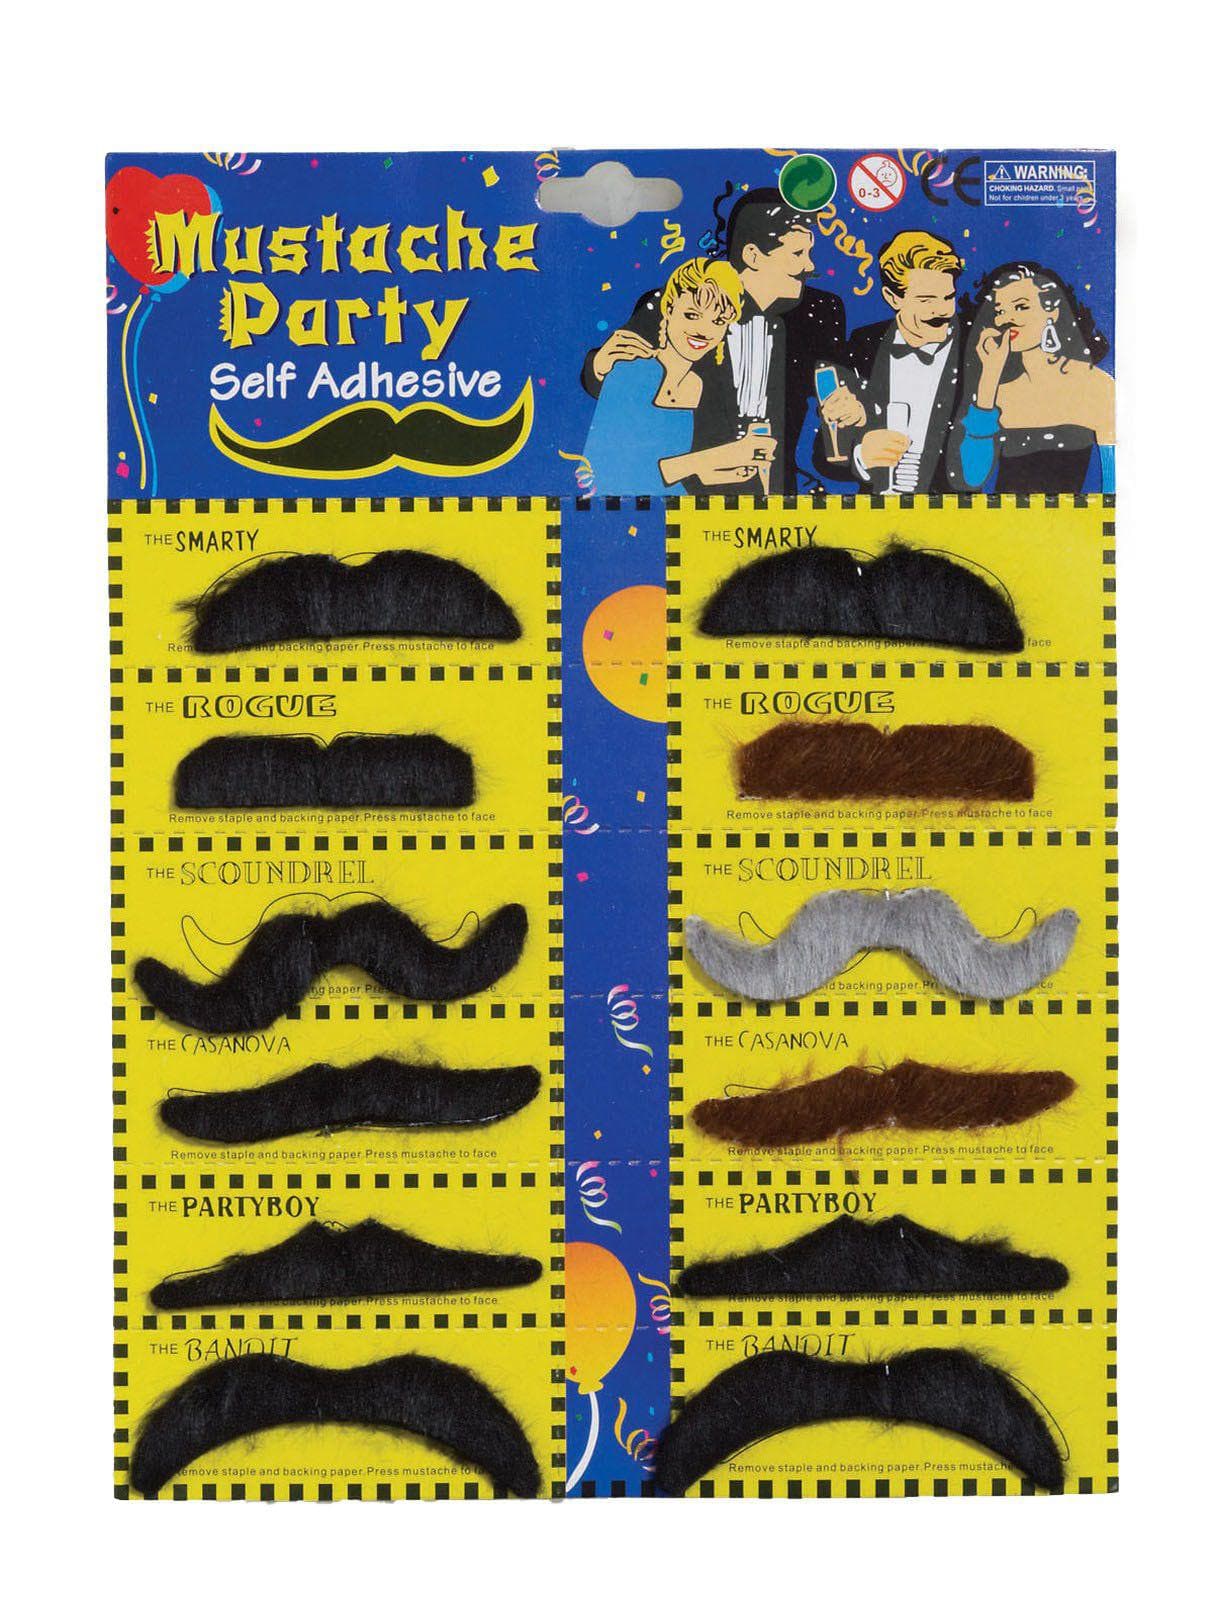 Adult Variety Pack of Mustaches - costumes.com